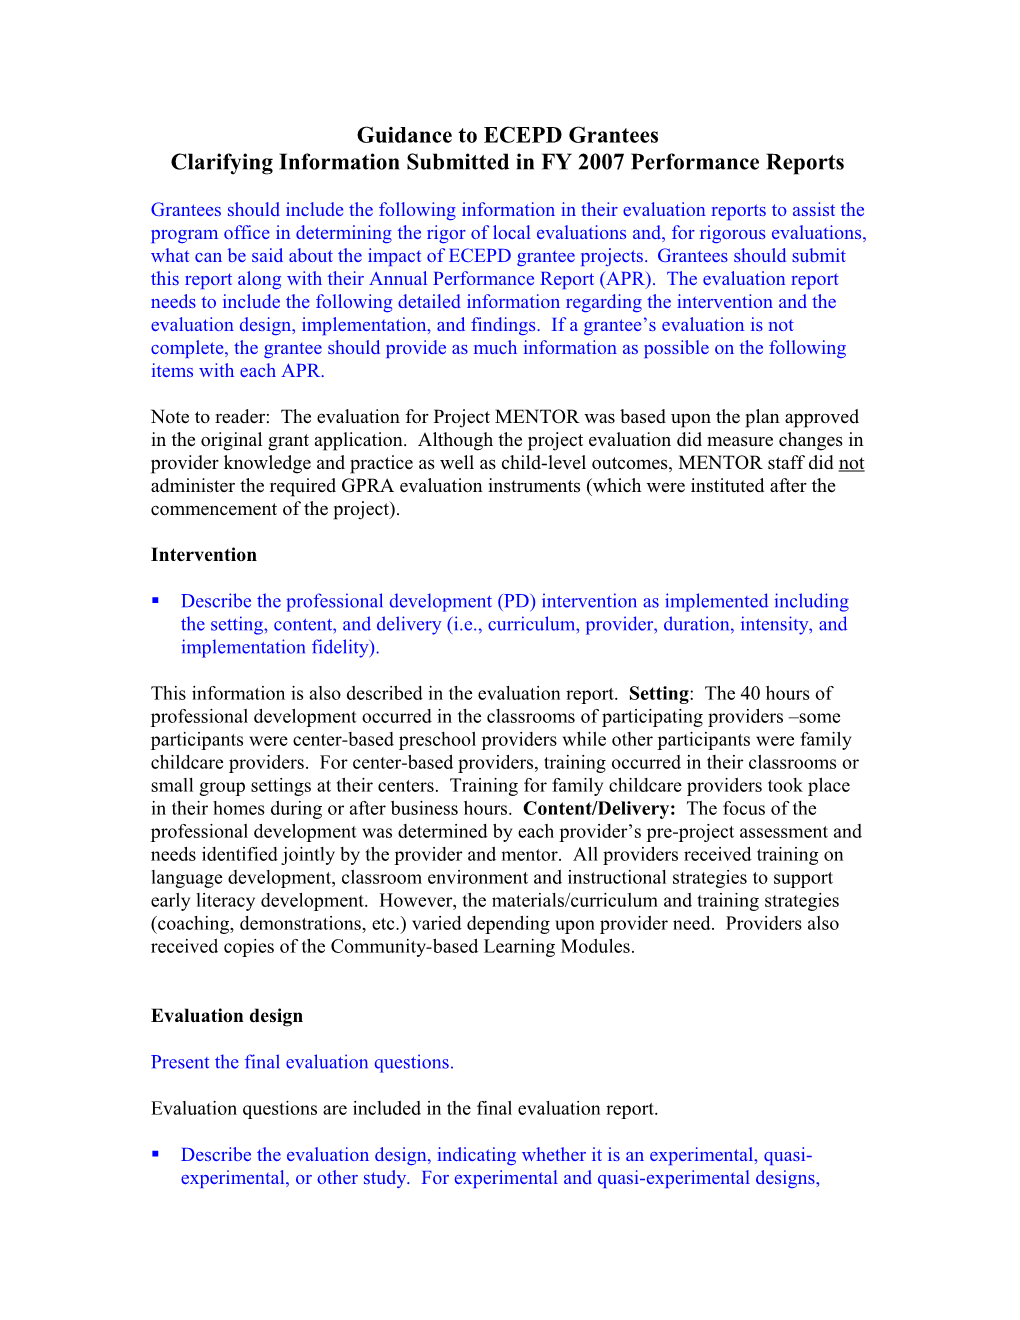 Guidance to ECEPD Grantees: Clarifying Information Submitted in FY 2007 Performance Reports